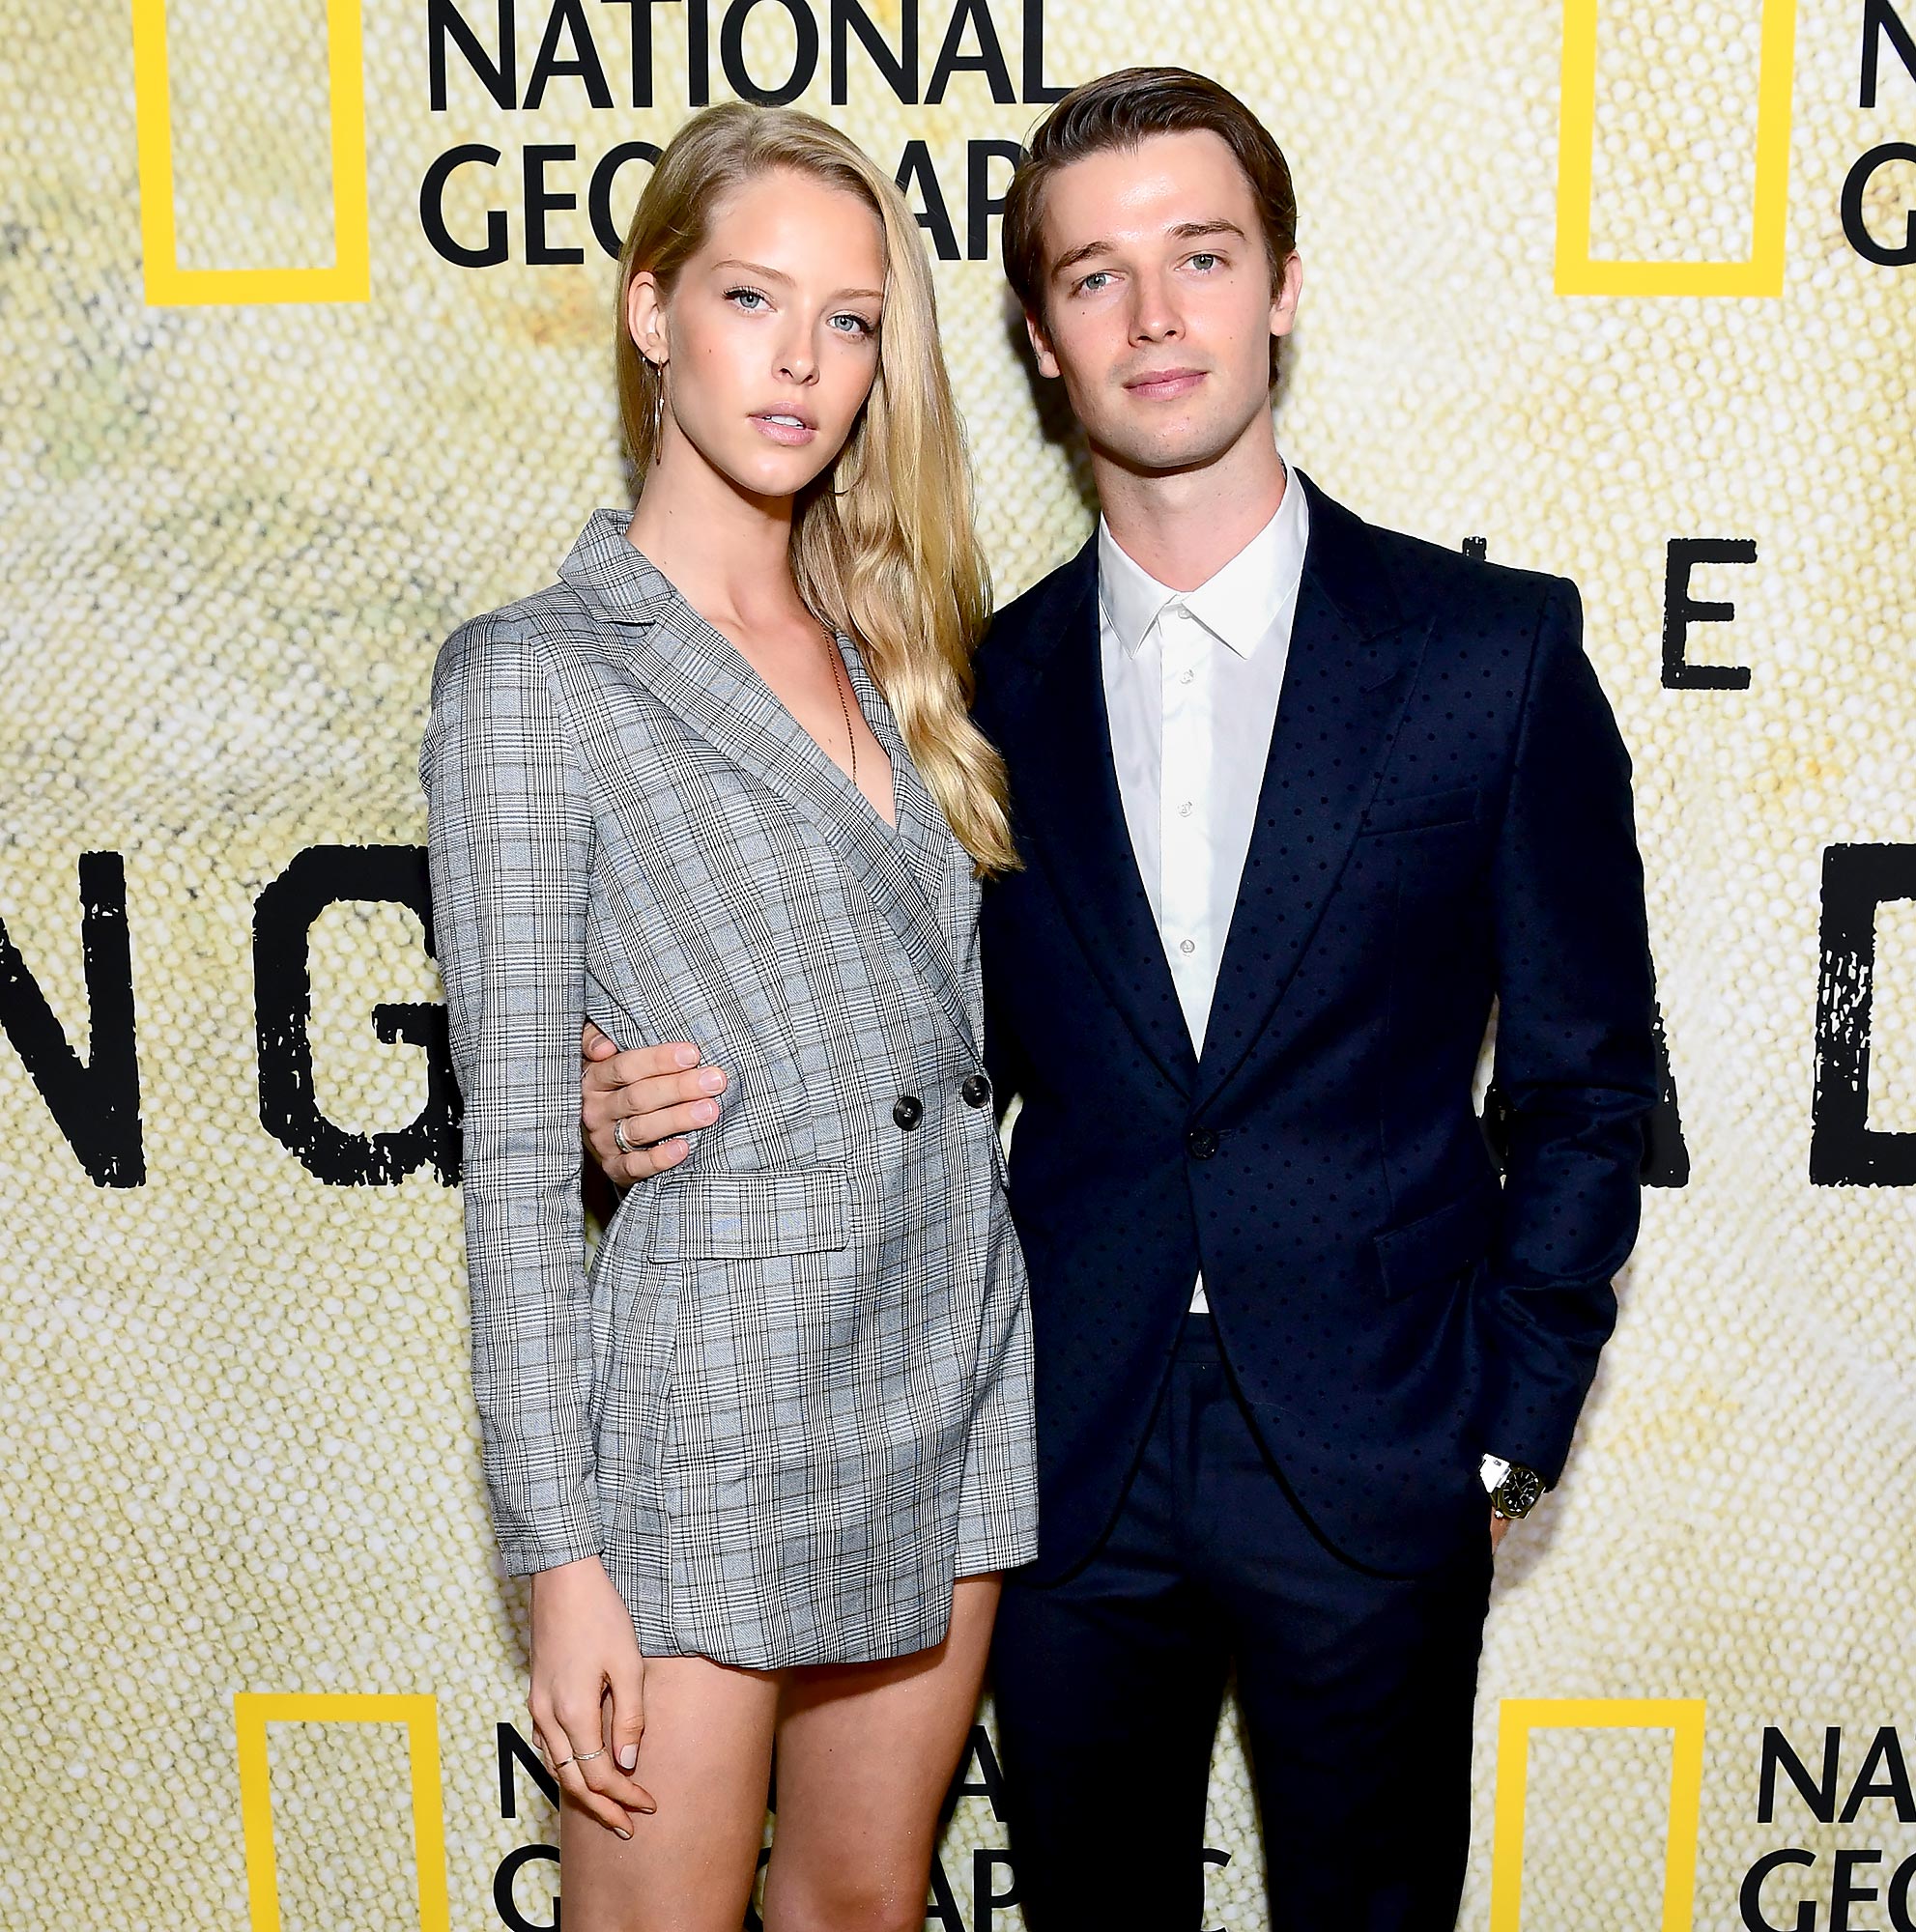 Patrick Schwarzenegger Reveals He and Fiance Abby Champion 'Haven't Even Started' Wedding Planning